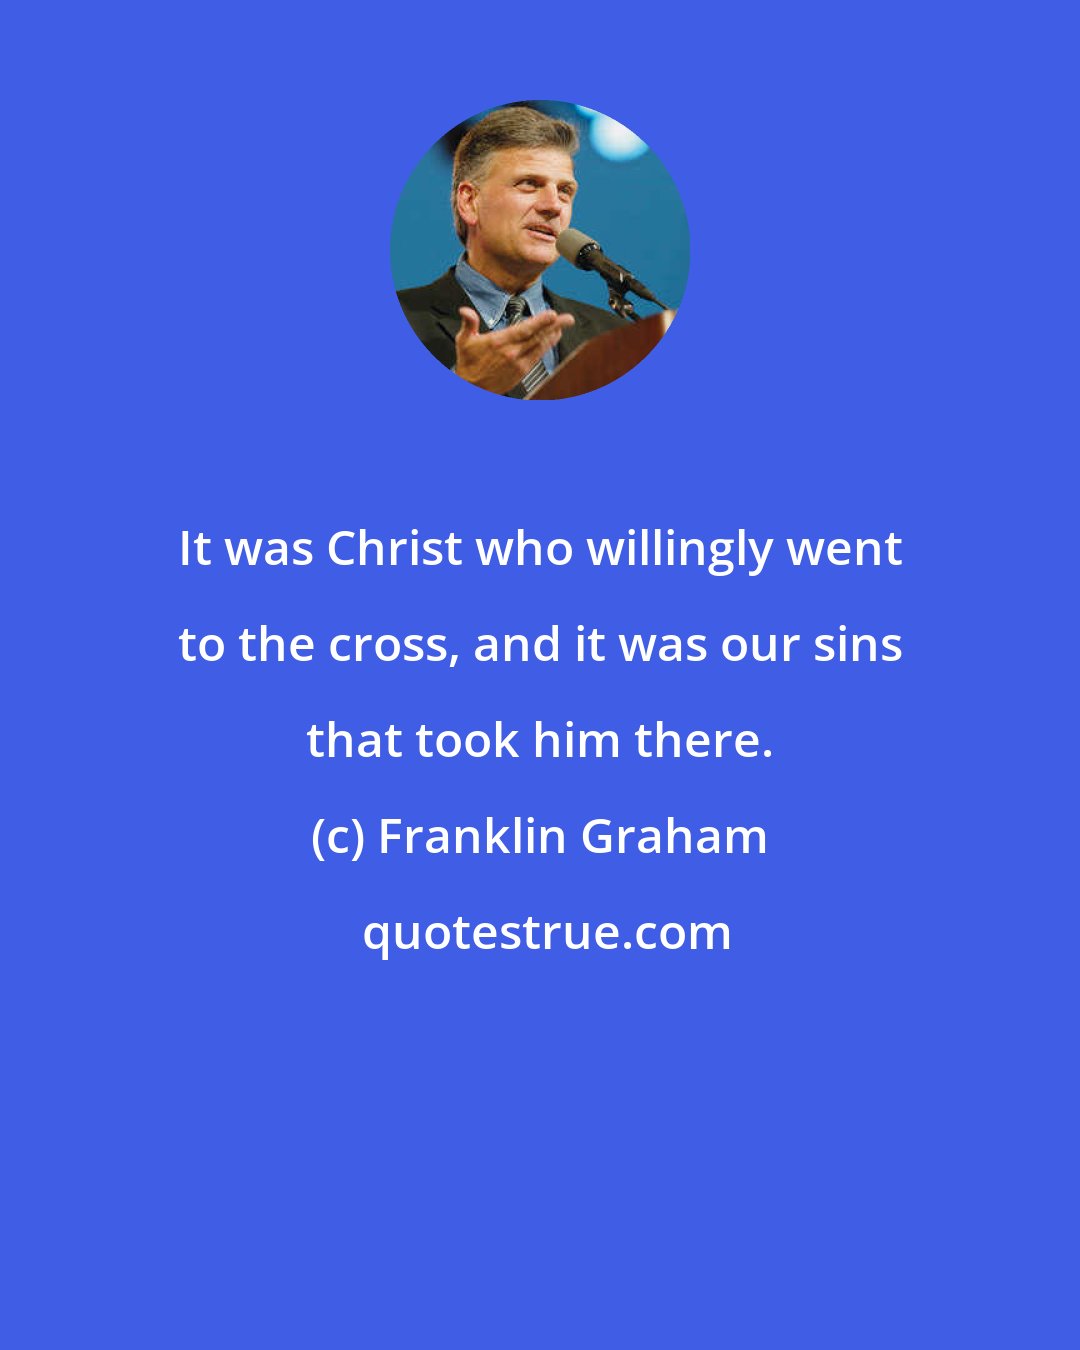 Franklin Graham: It was Christ who willingly went to the cross, and it was our sins that took him there.